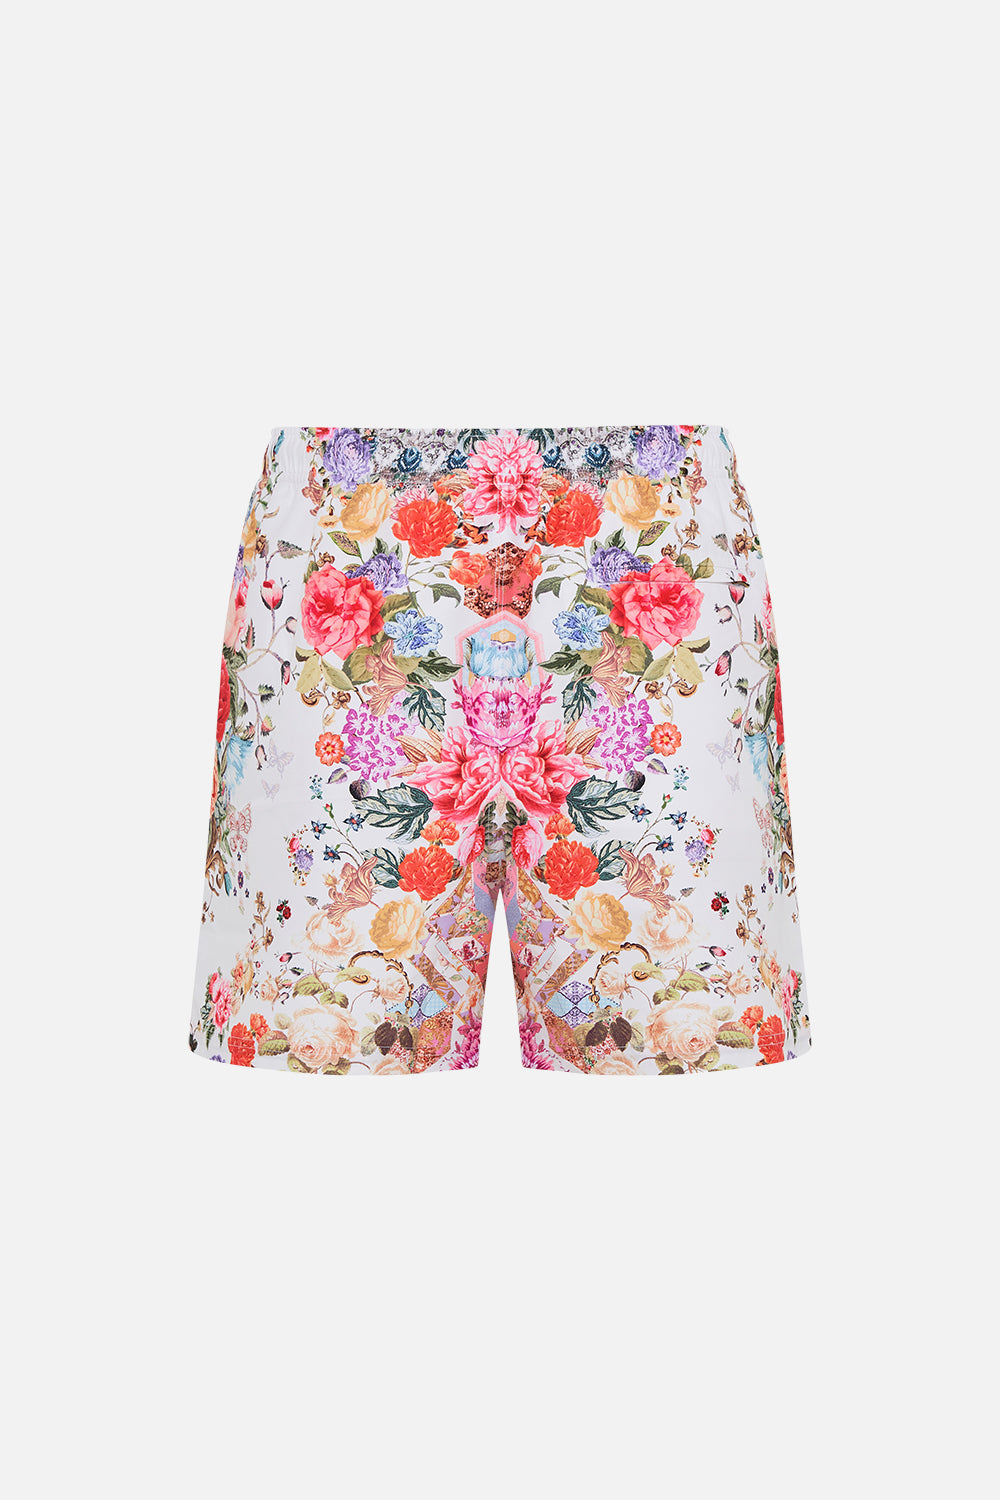 Hotel Franks by CAMILLA floral mid length boardshort in Sew Yesterday